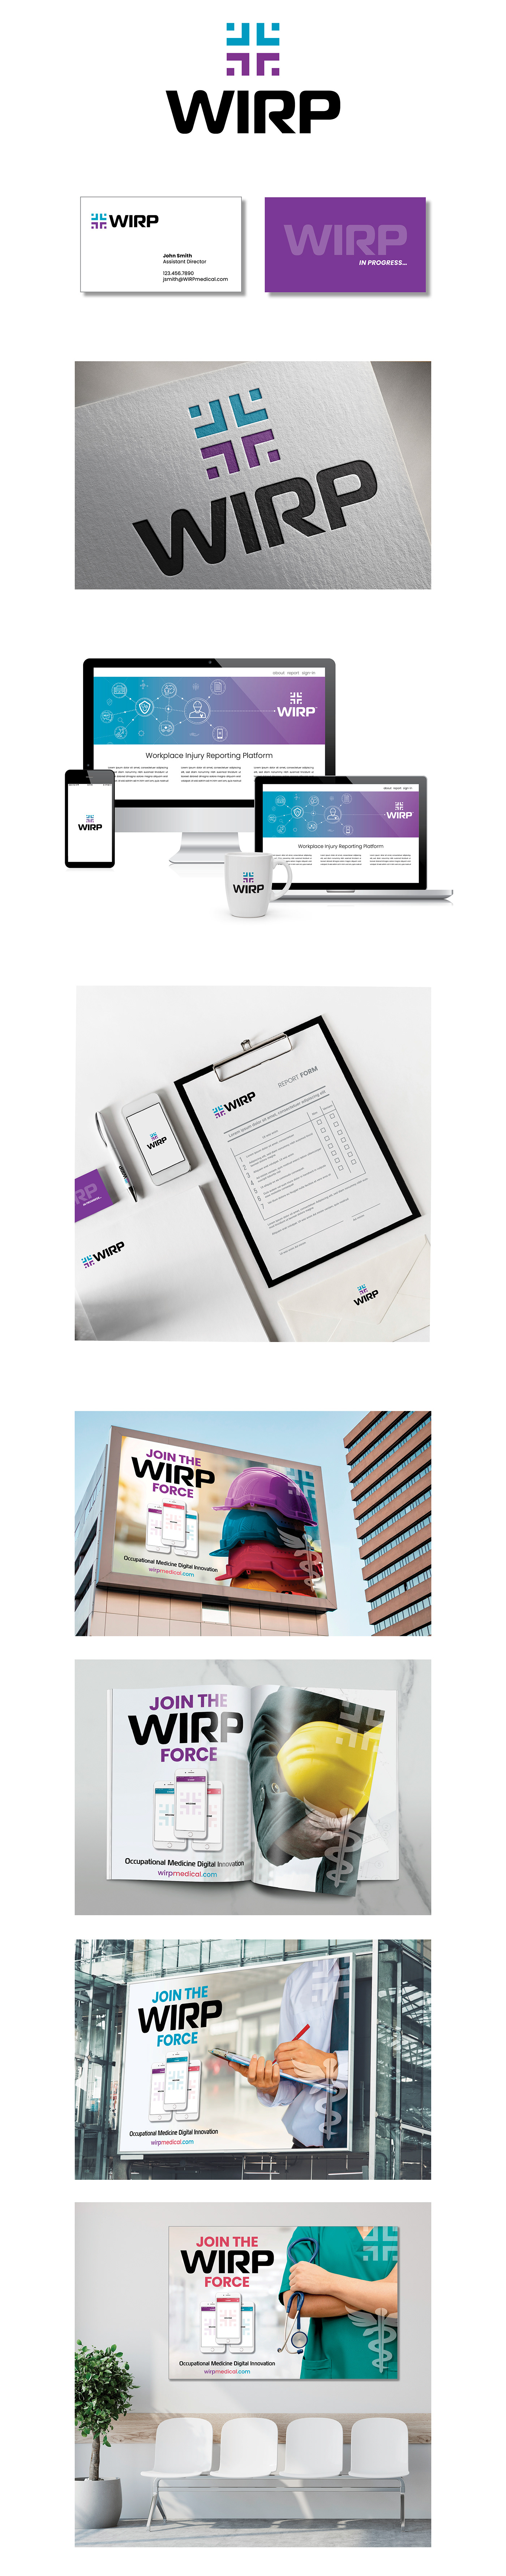 WIRP logo design, stationary, mobile app graphics, pitch deck infographics and advertising campaign